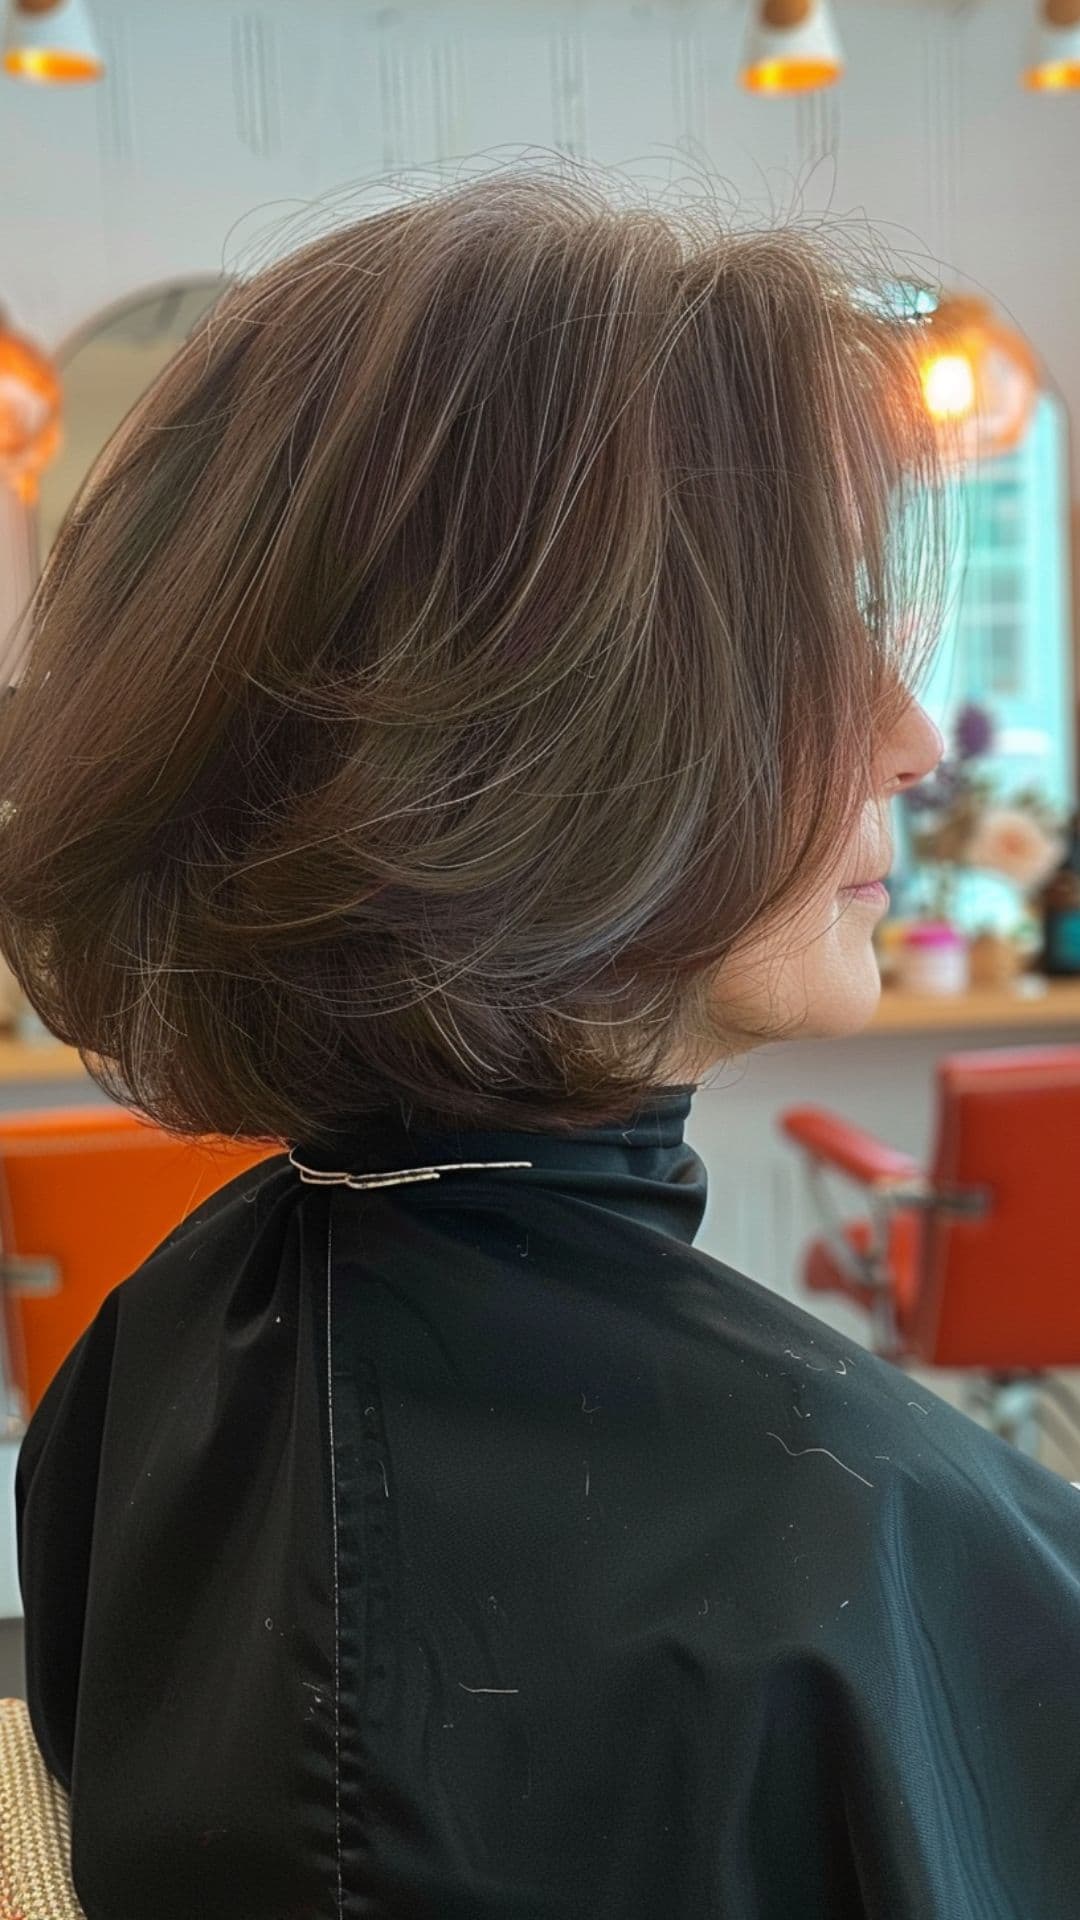 An old woman modelling a long layered bob with volume.